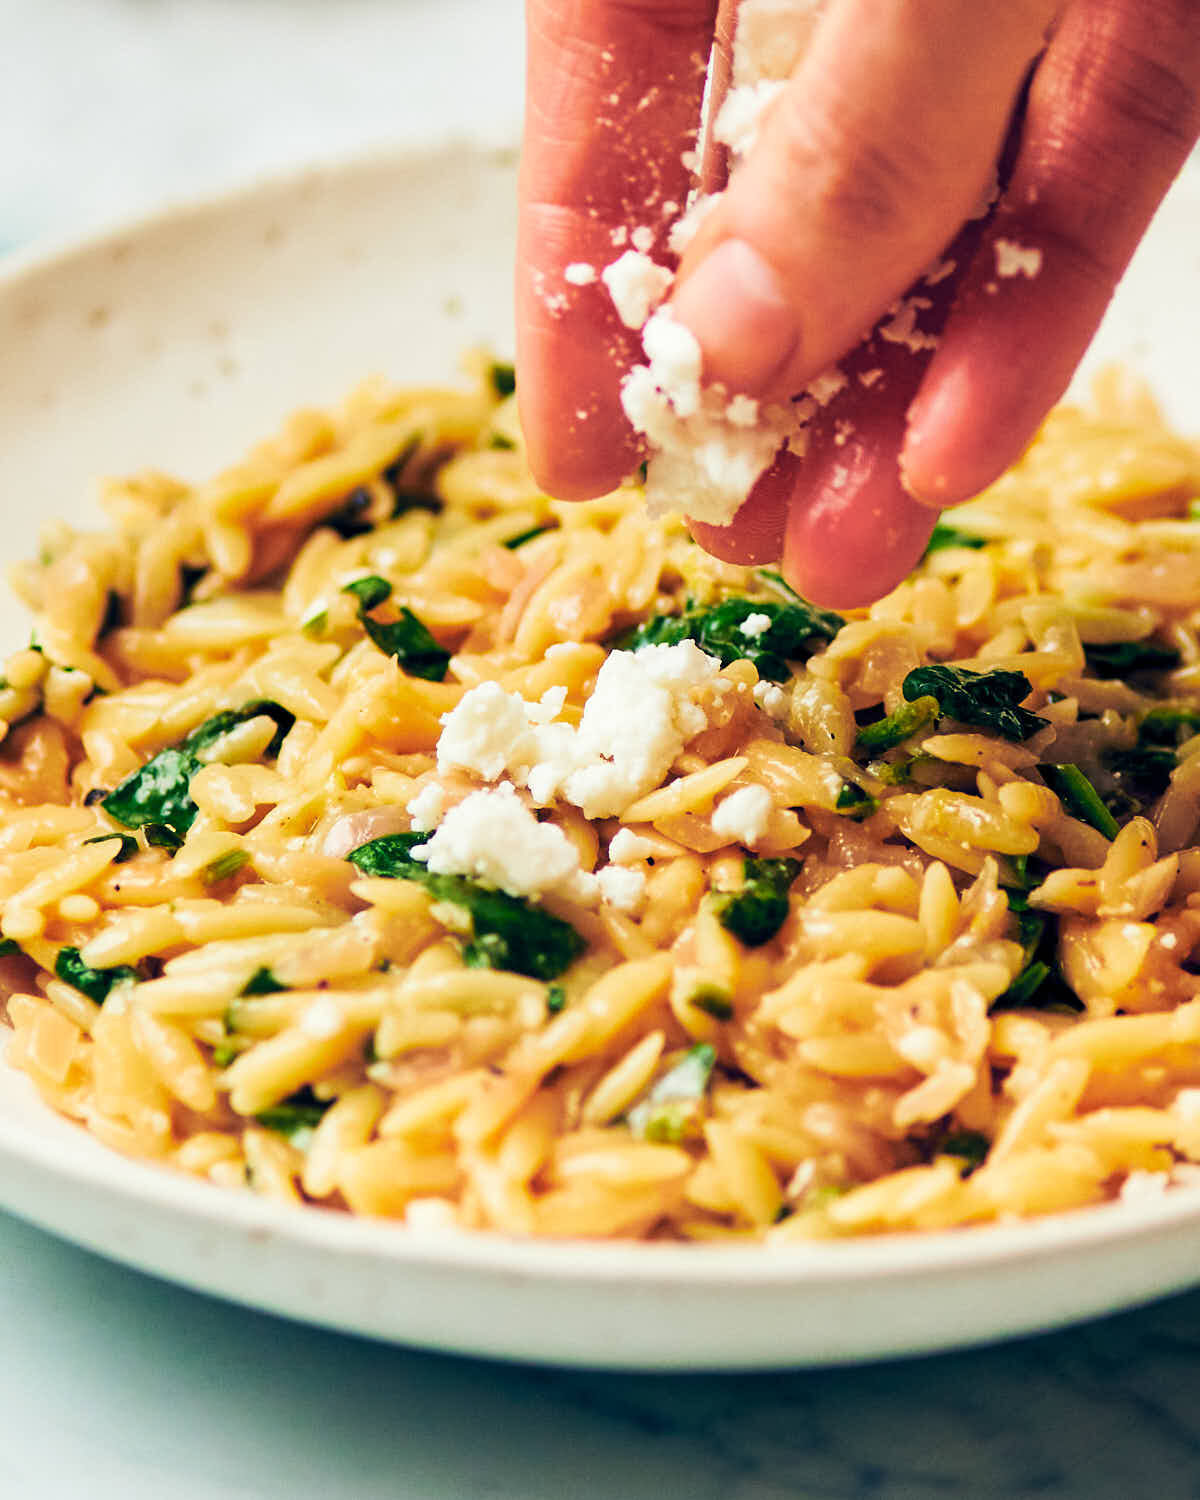 A hand sprinkling feta cheese over a plate of One Pan Lemon Spinach Orzo.